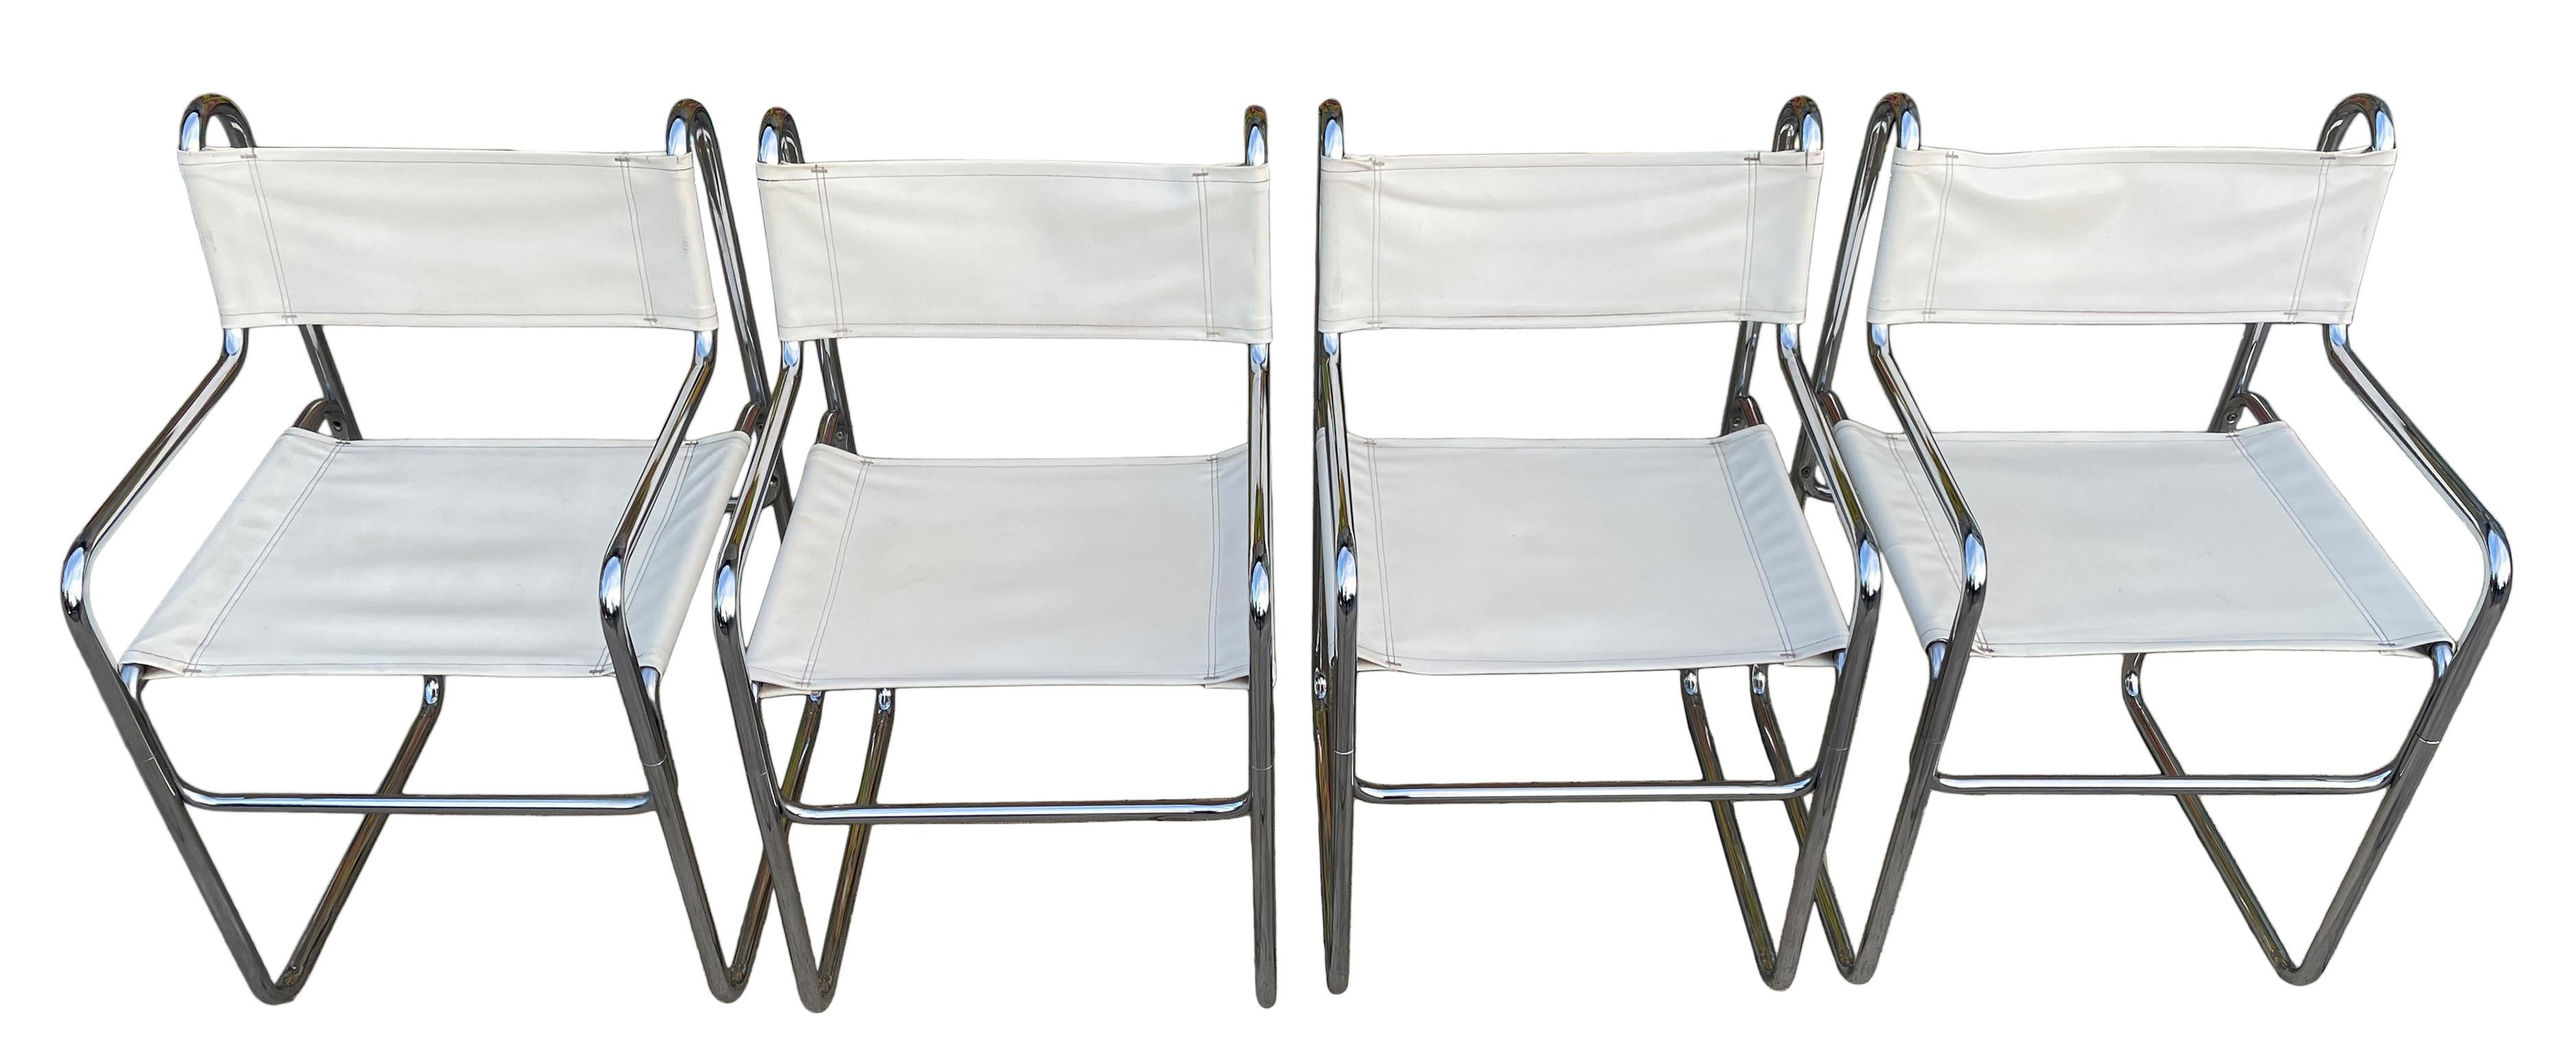 Set of 4 mid century tubular chrome faux white leather sling dining chairs. Matching set all in good condition very clean set. Great for use as dining chairs or side chairs. Style of Cassina.

Located in Brooklyn NYC

Measures: 17